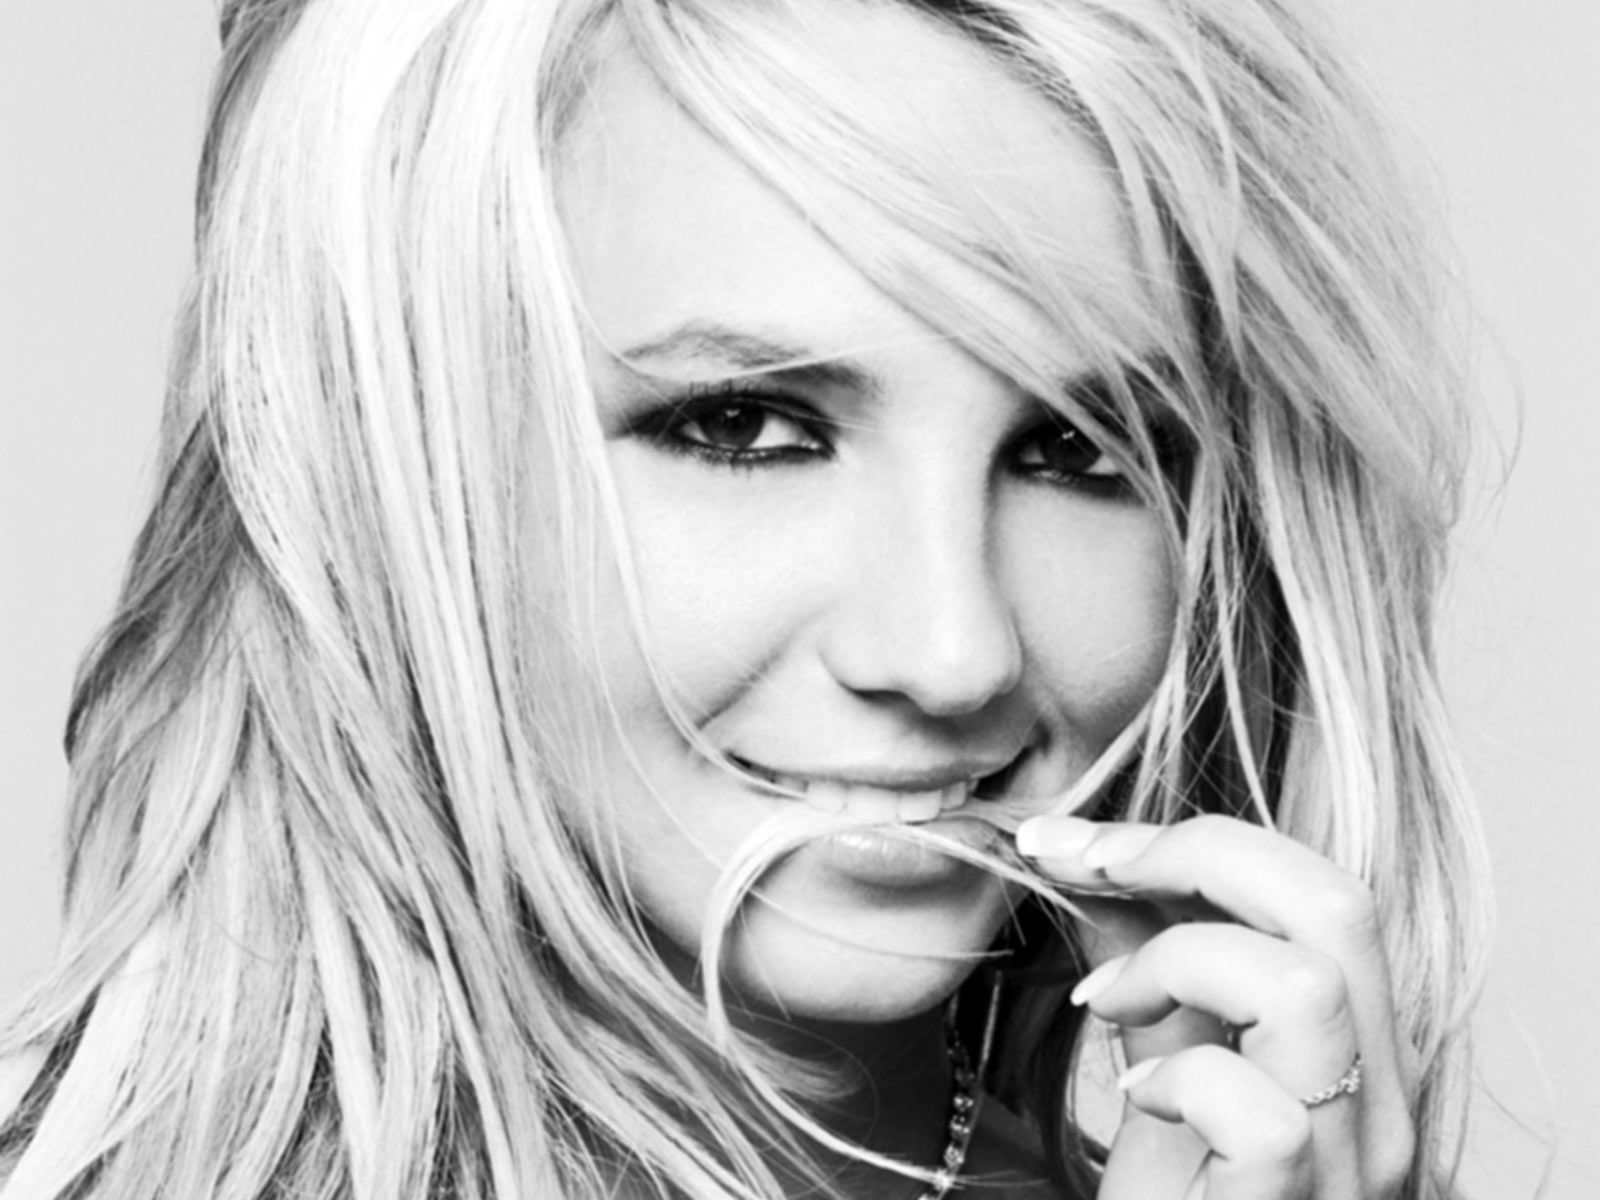 Britney Spears HD Wallpaper, Britney Spears Images, New Backgrounds